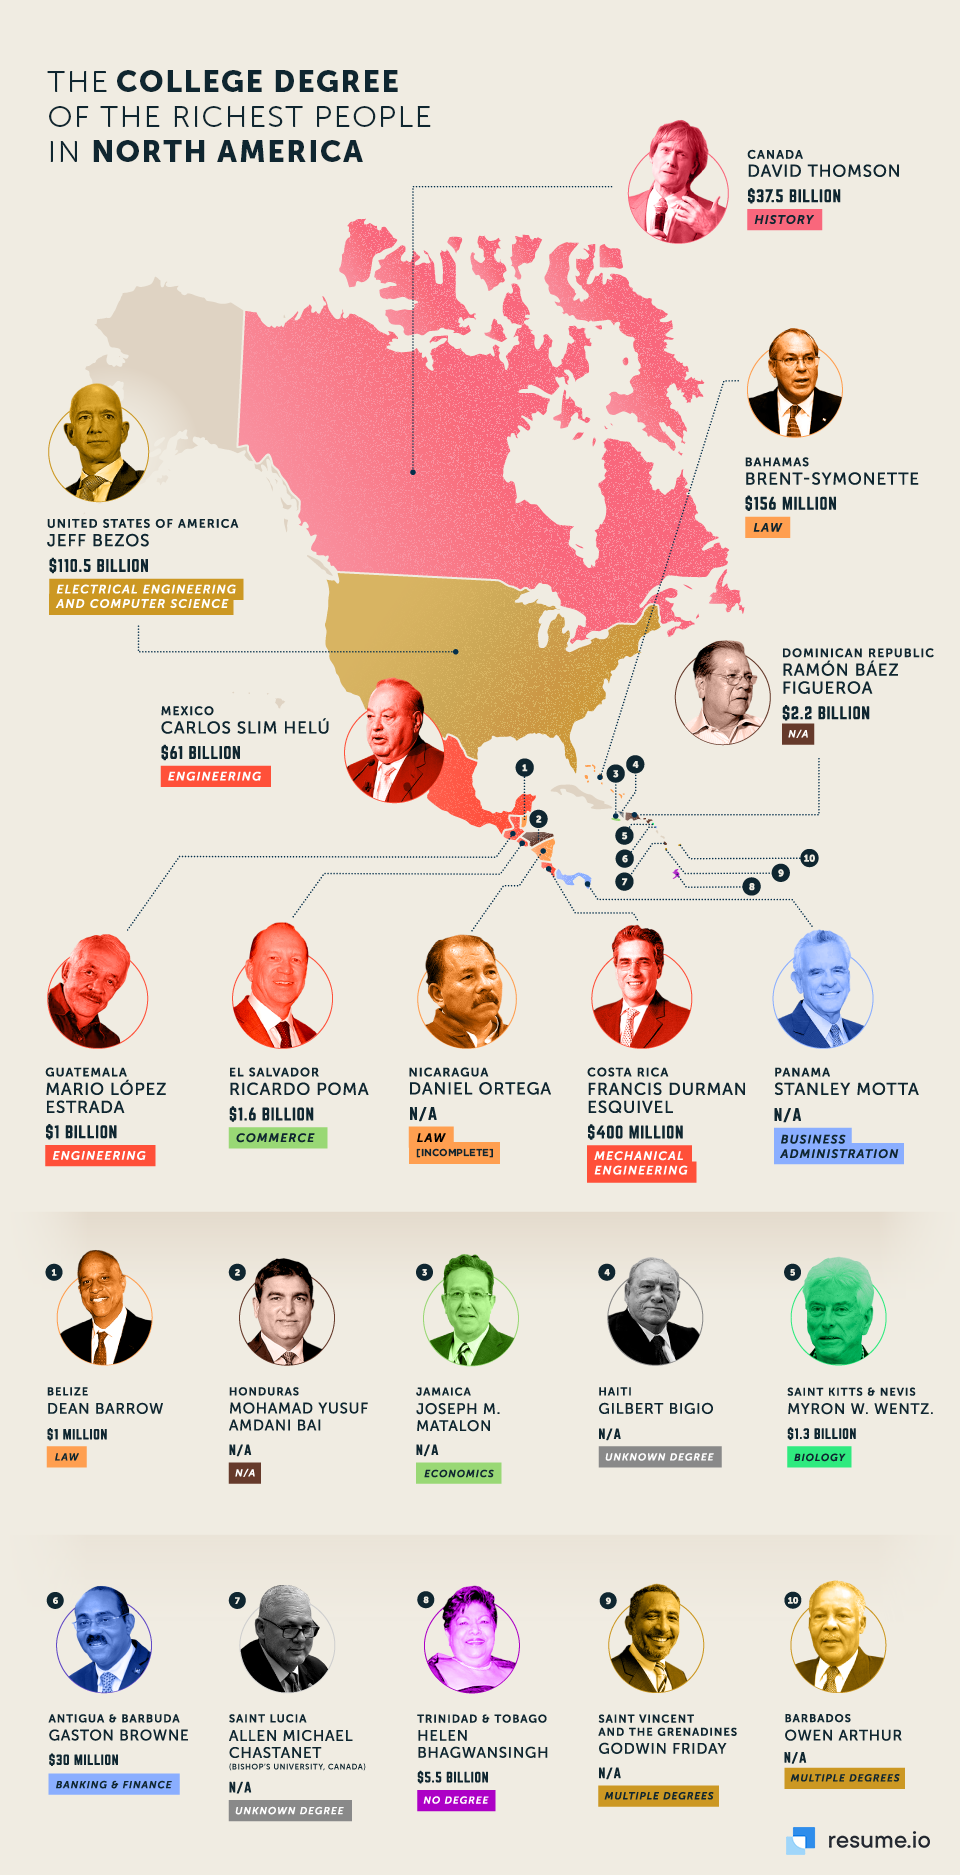 the college degree of the richest people in north america